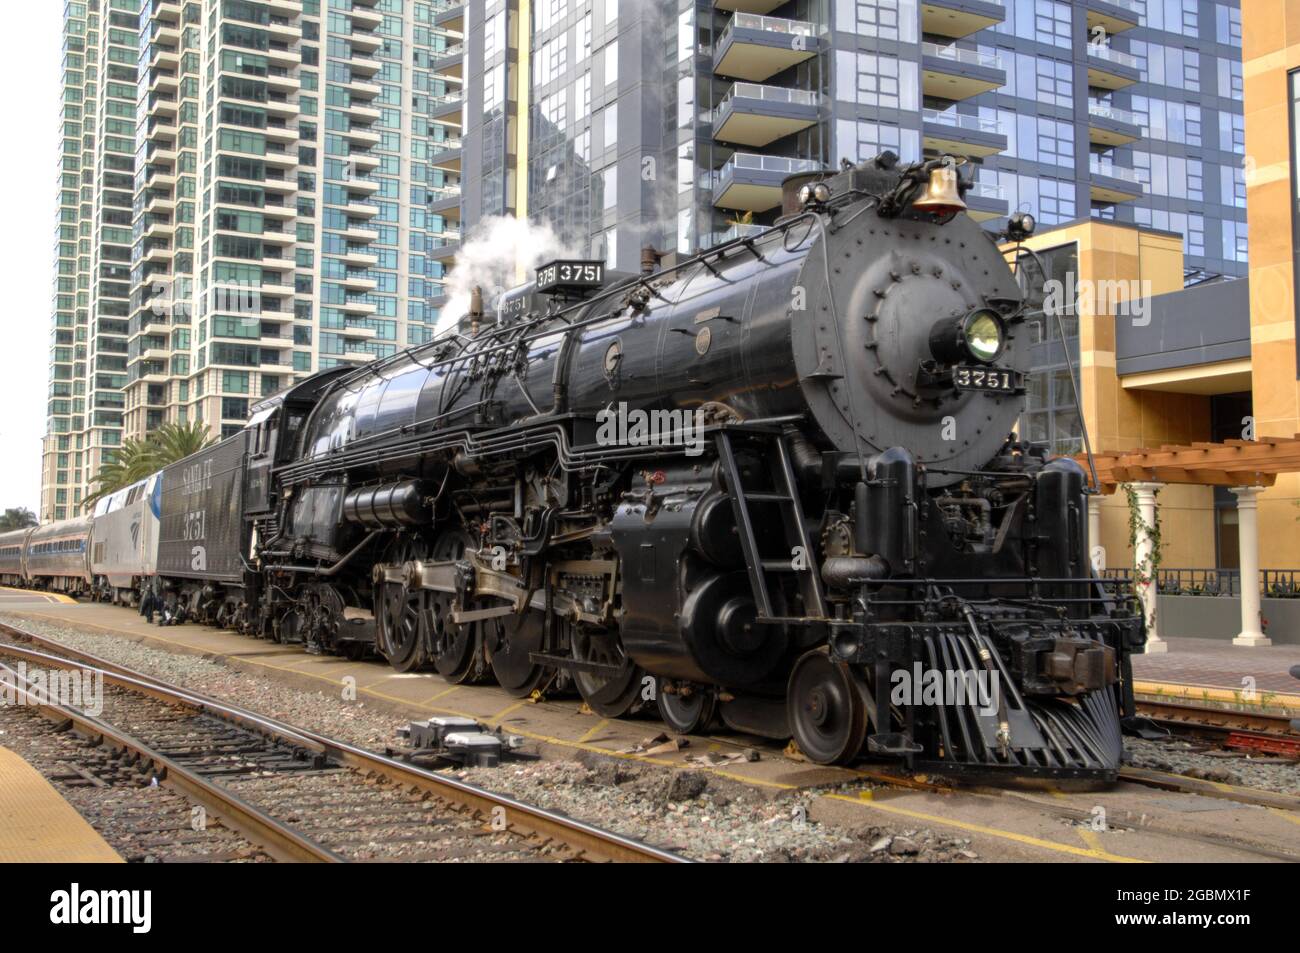 3751 steam locomotive ready for departure at the Santa Fe Depot in San Diego Stock Photo